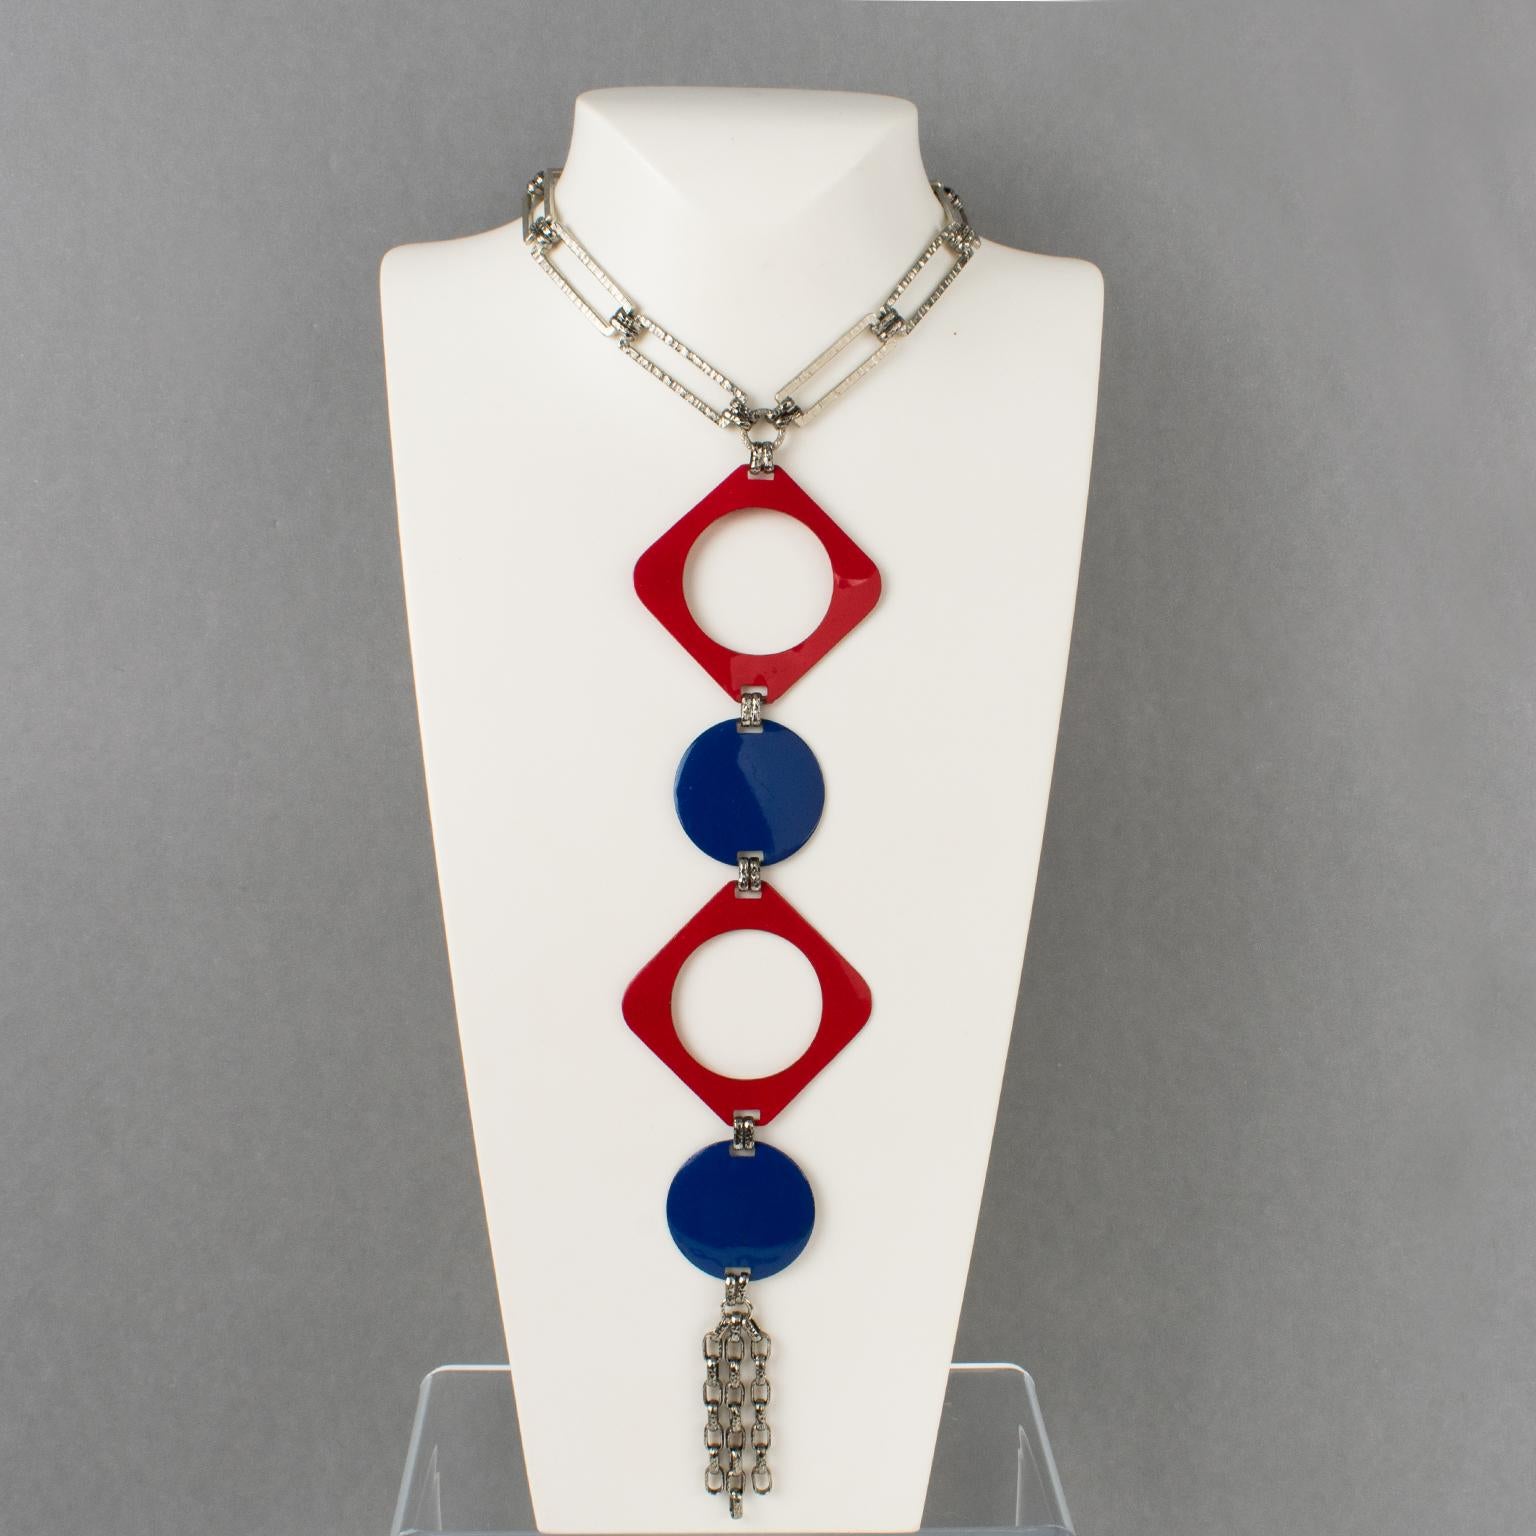 Modernist Space Age Paco Rabanne Style Collar Necklace with Blue and Red Enamel, 1960s For Sale